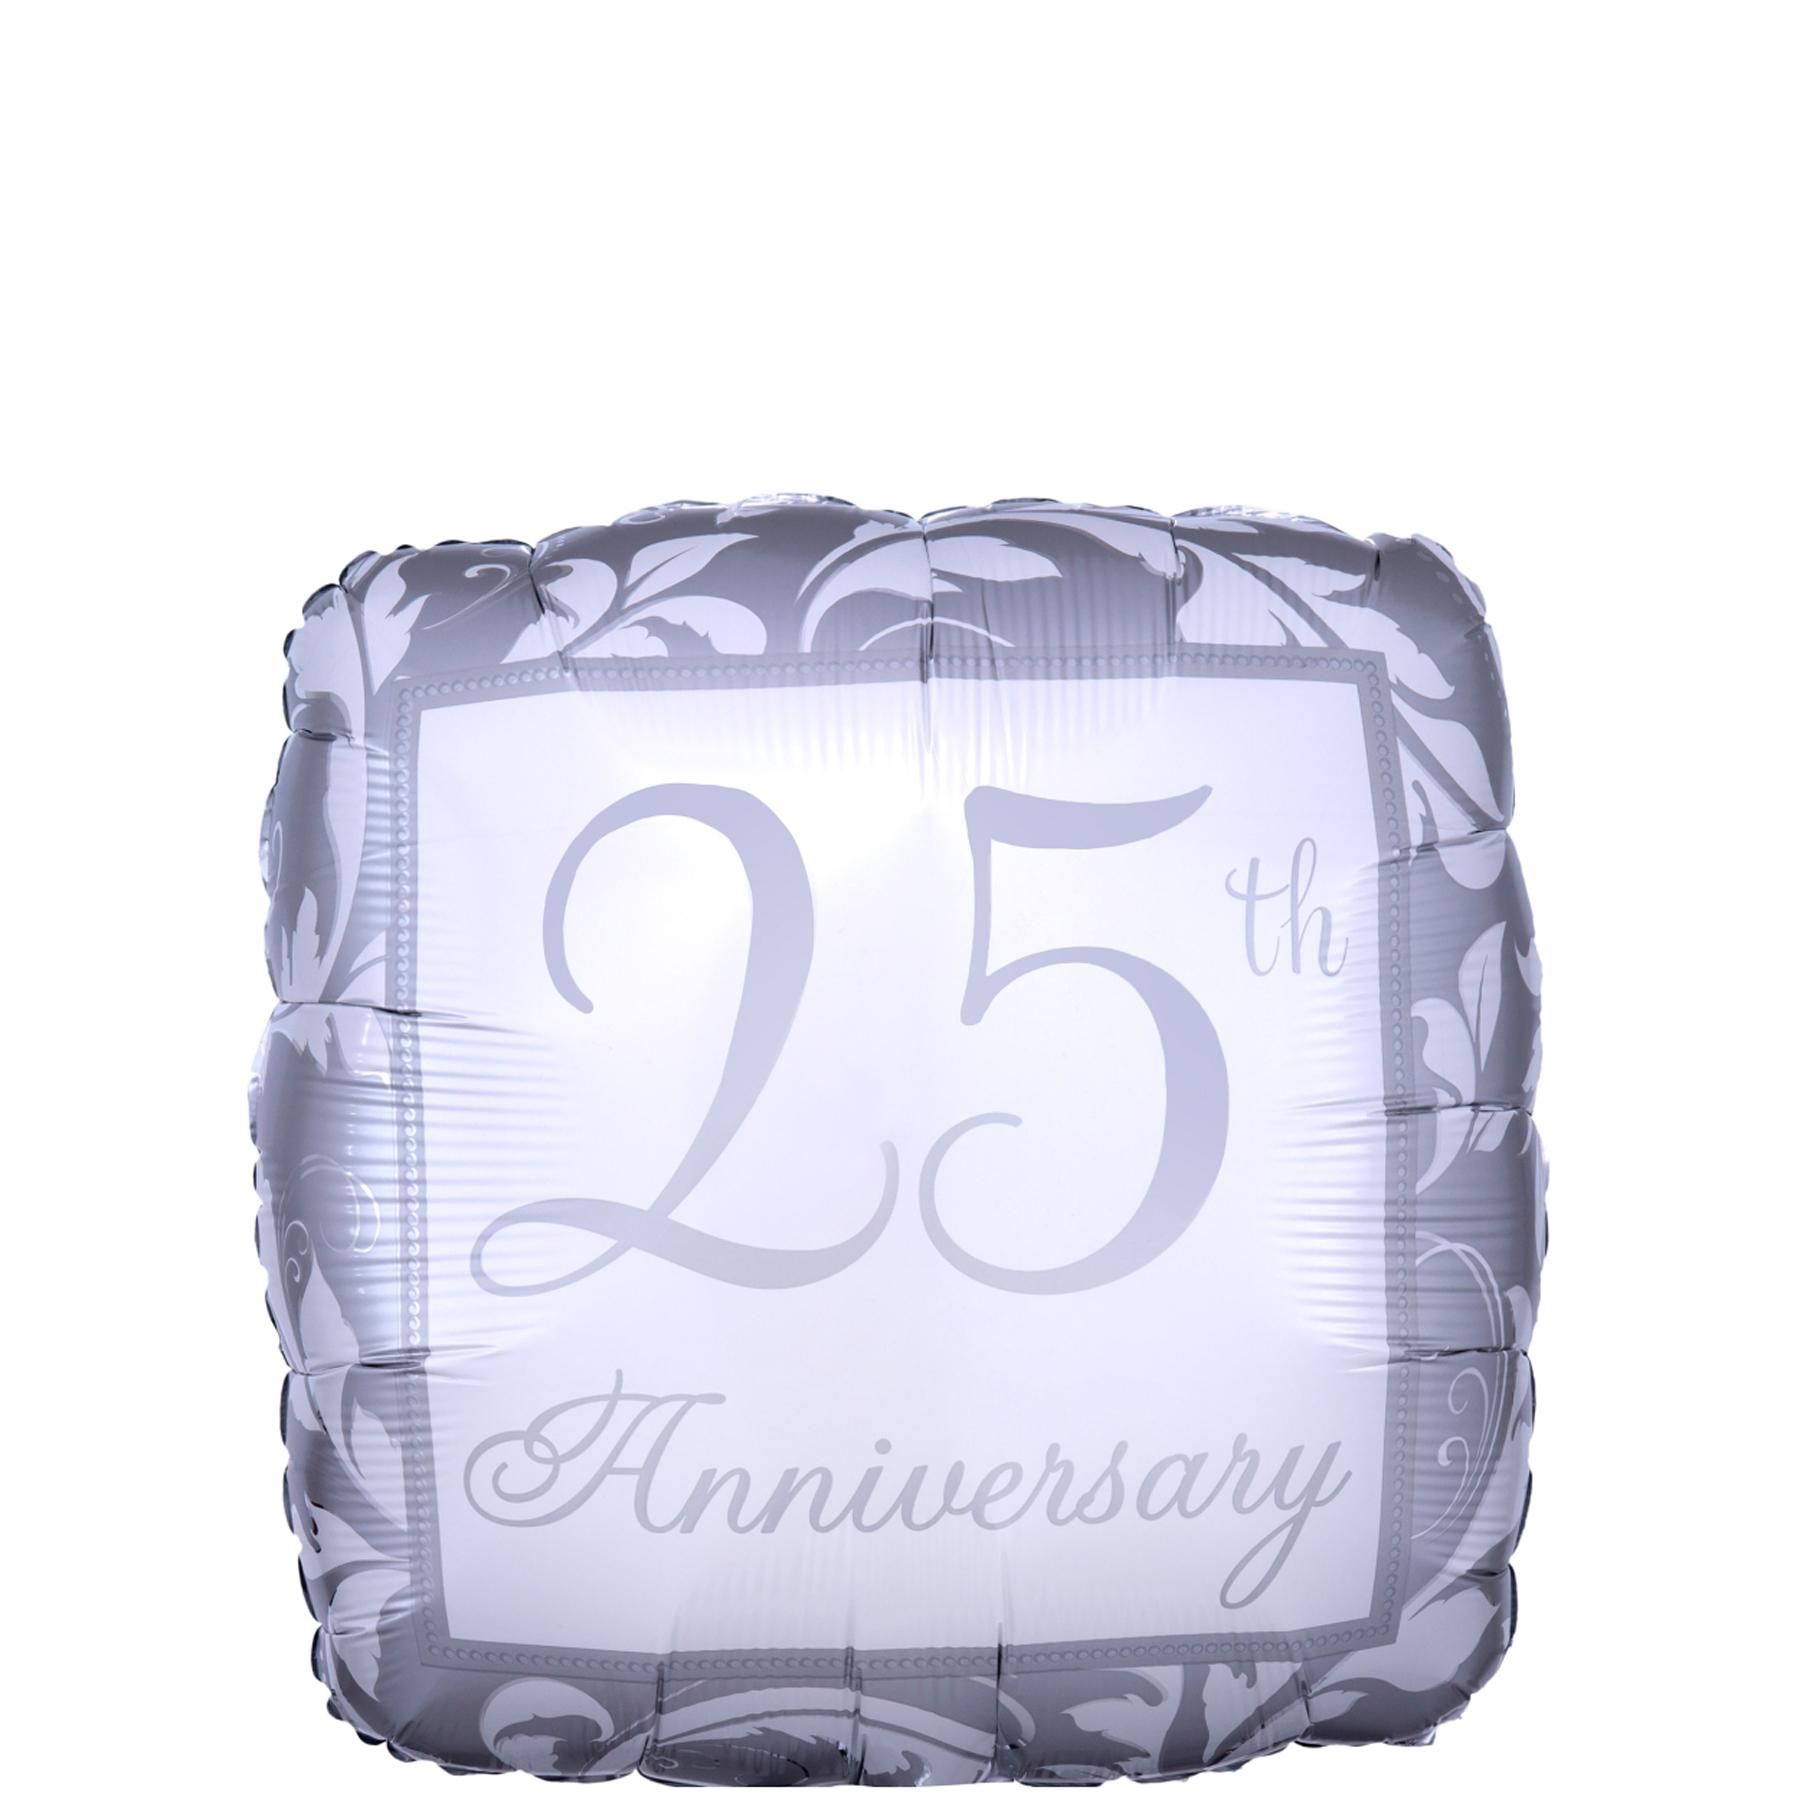 25th Anniversary Silver Elegant Square Balloon 45cm Balloons & Streamers - Party Centre - Party Centre